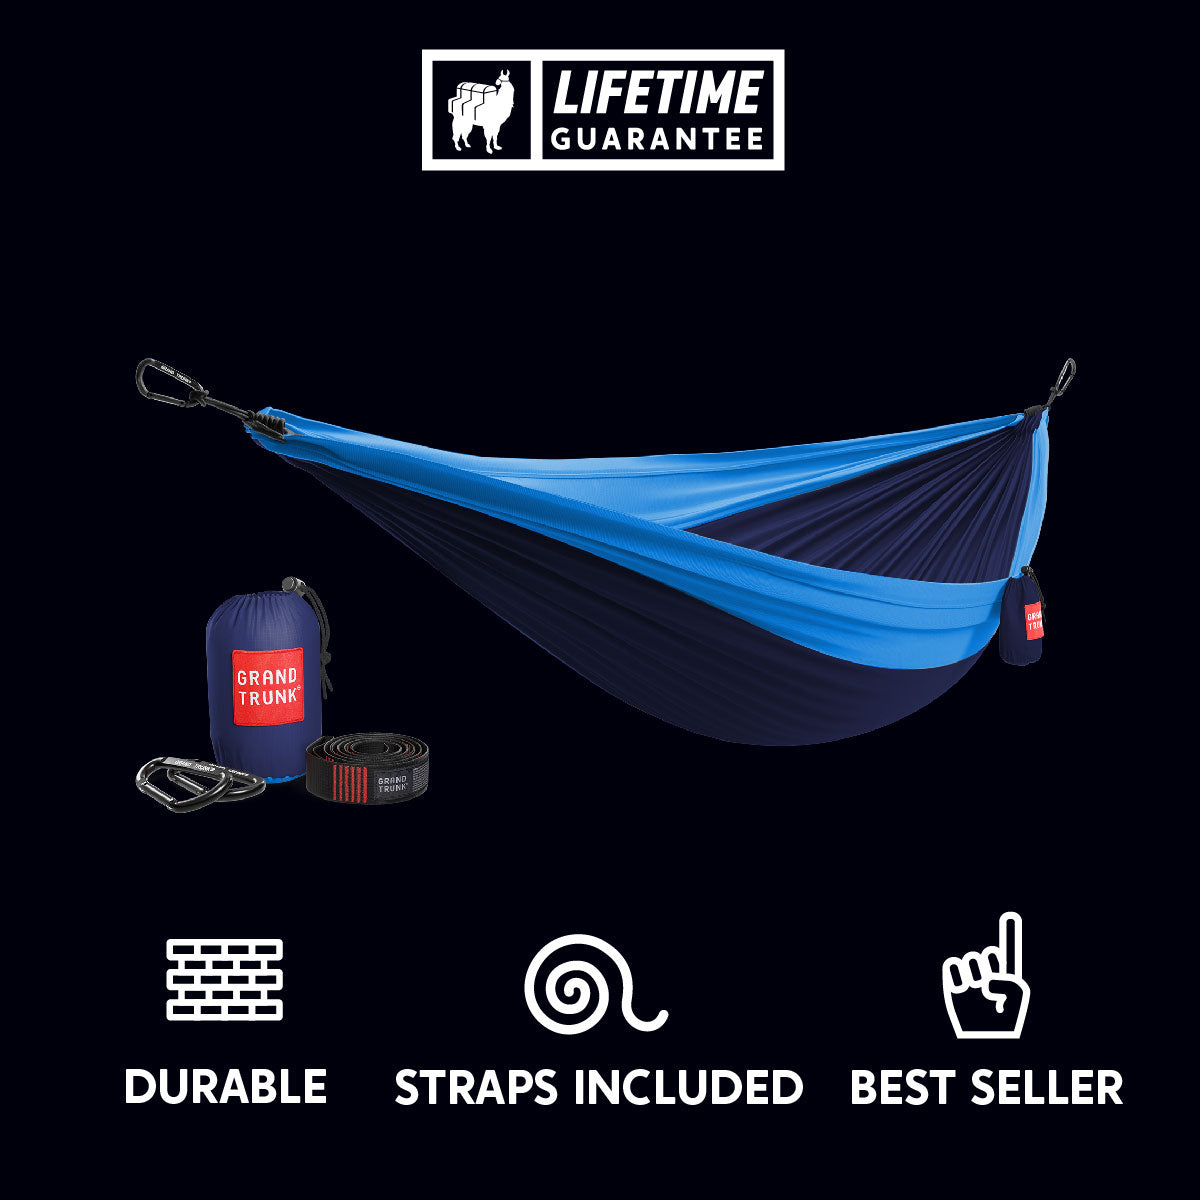 durable blue and navy parachute nylon hammock with straps included. best seller.